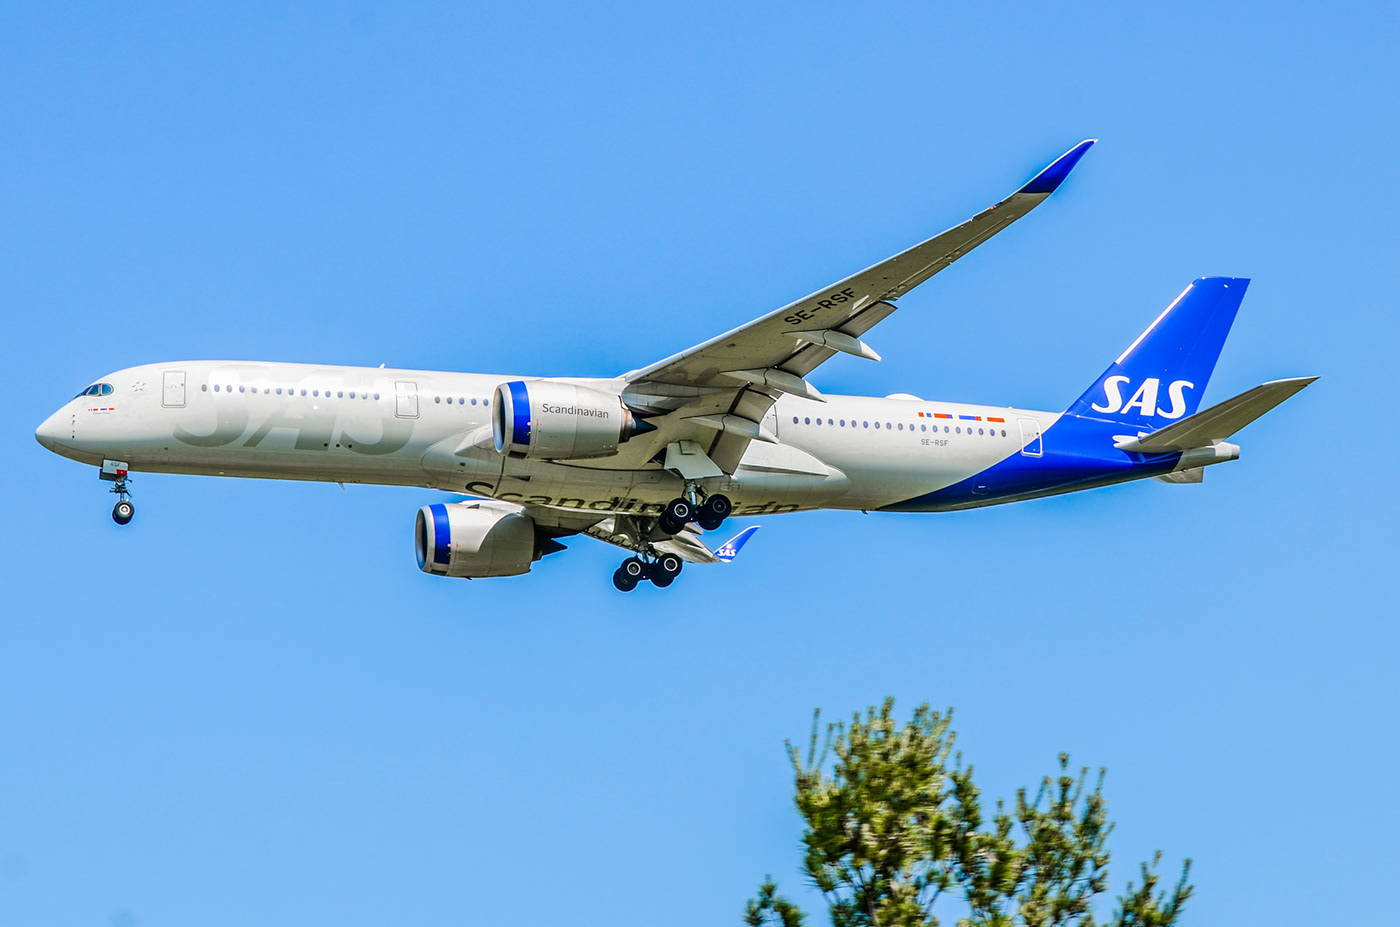 Airbus airbus A350 Dulles Airport Scandinavian Airlines